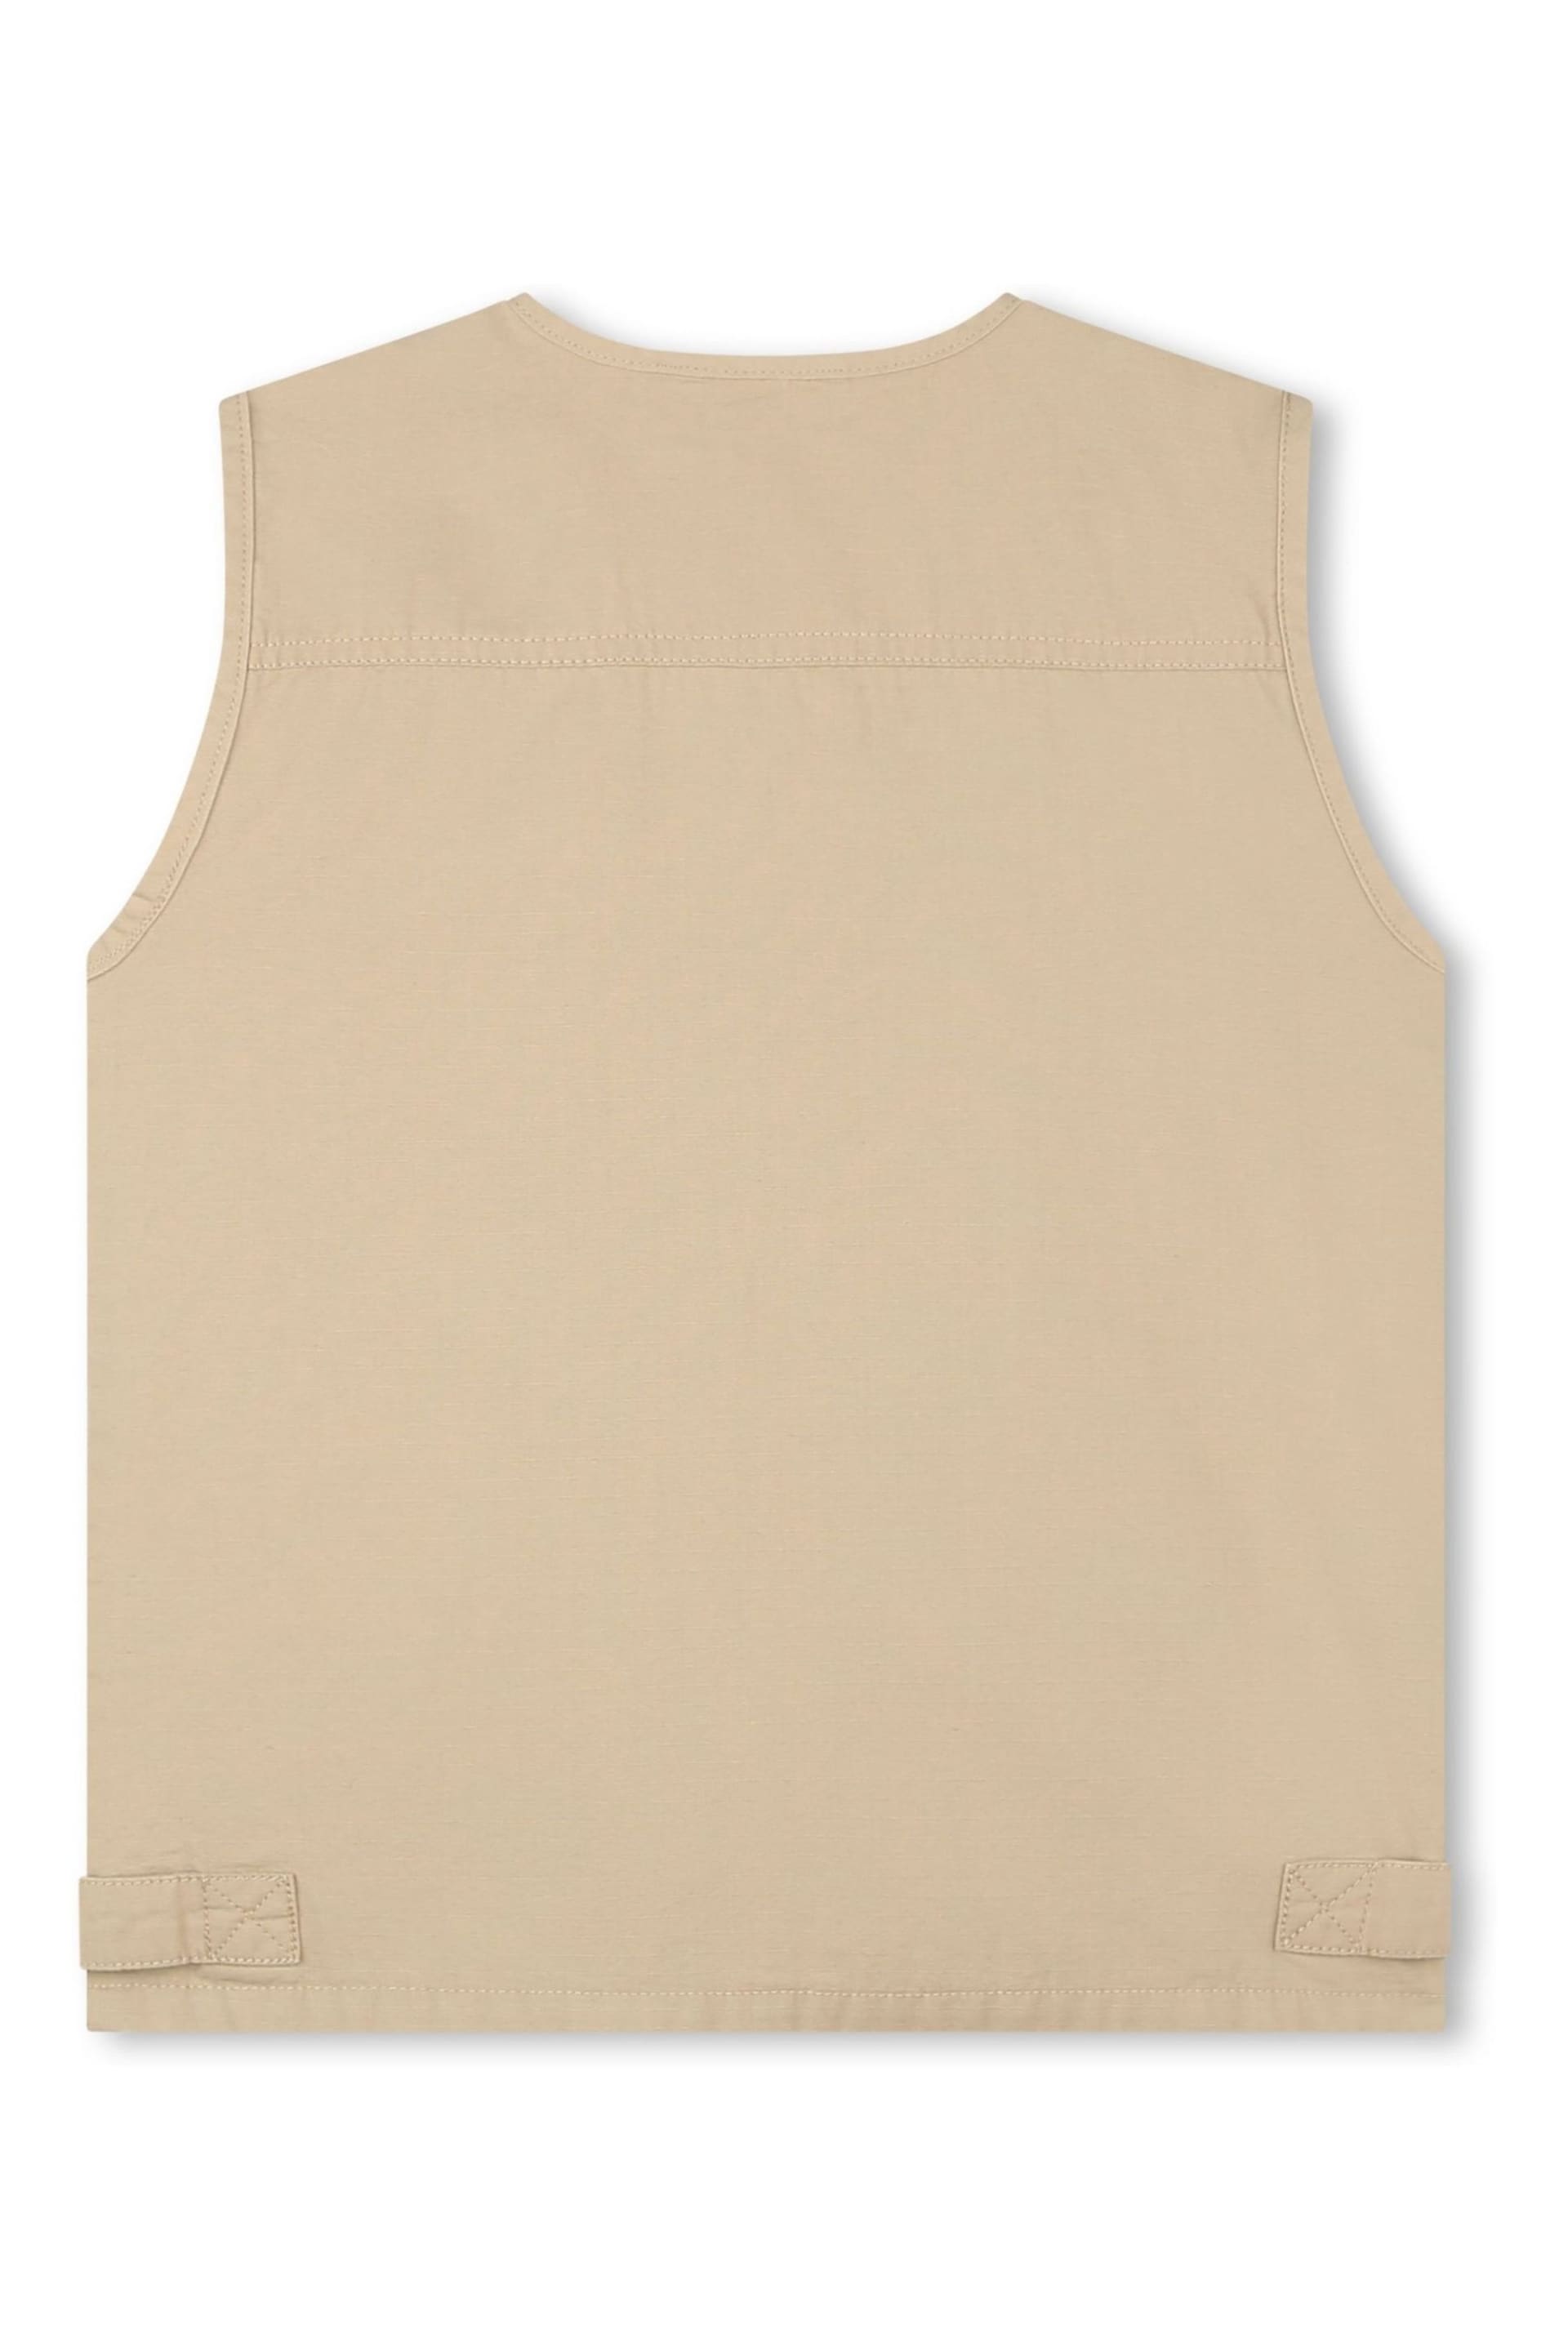 Timberland Natural Utility Cargo Gilet With Pockets - Image 3 of 4